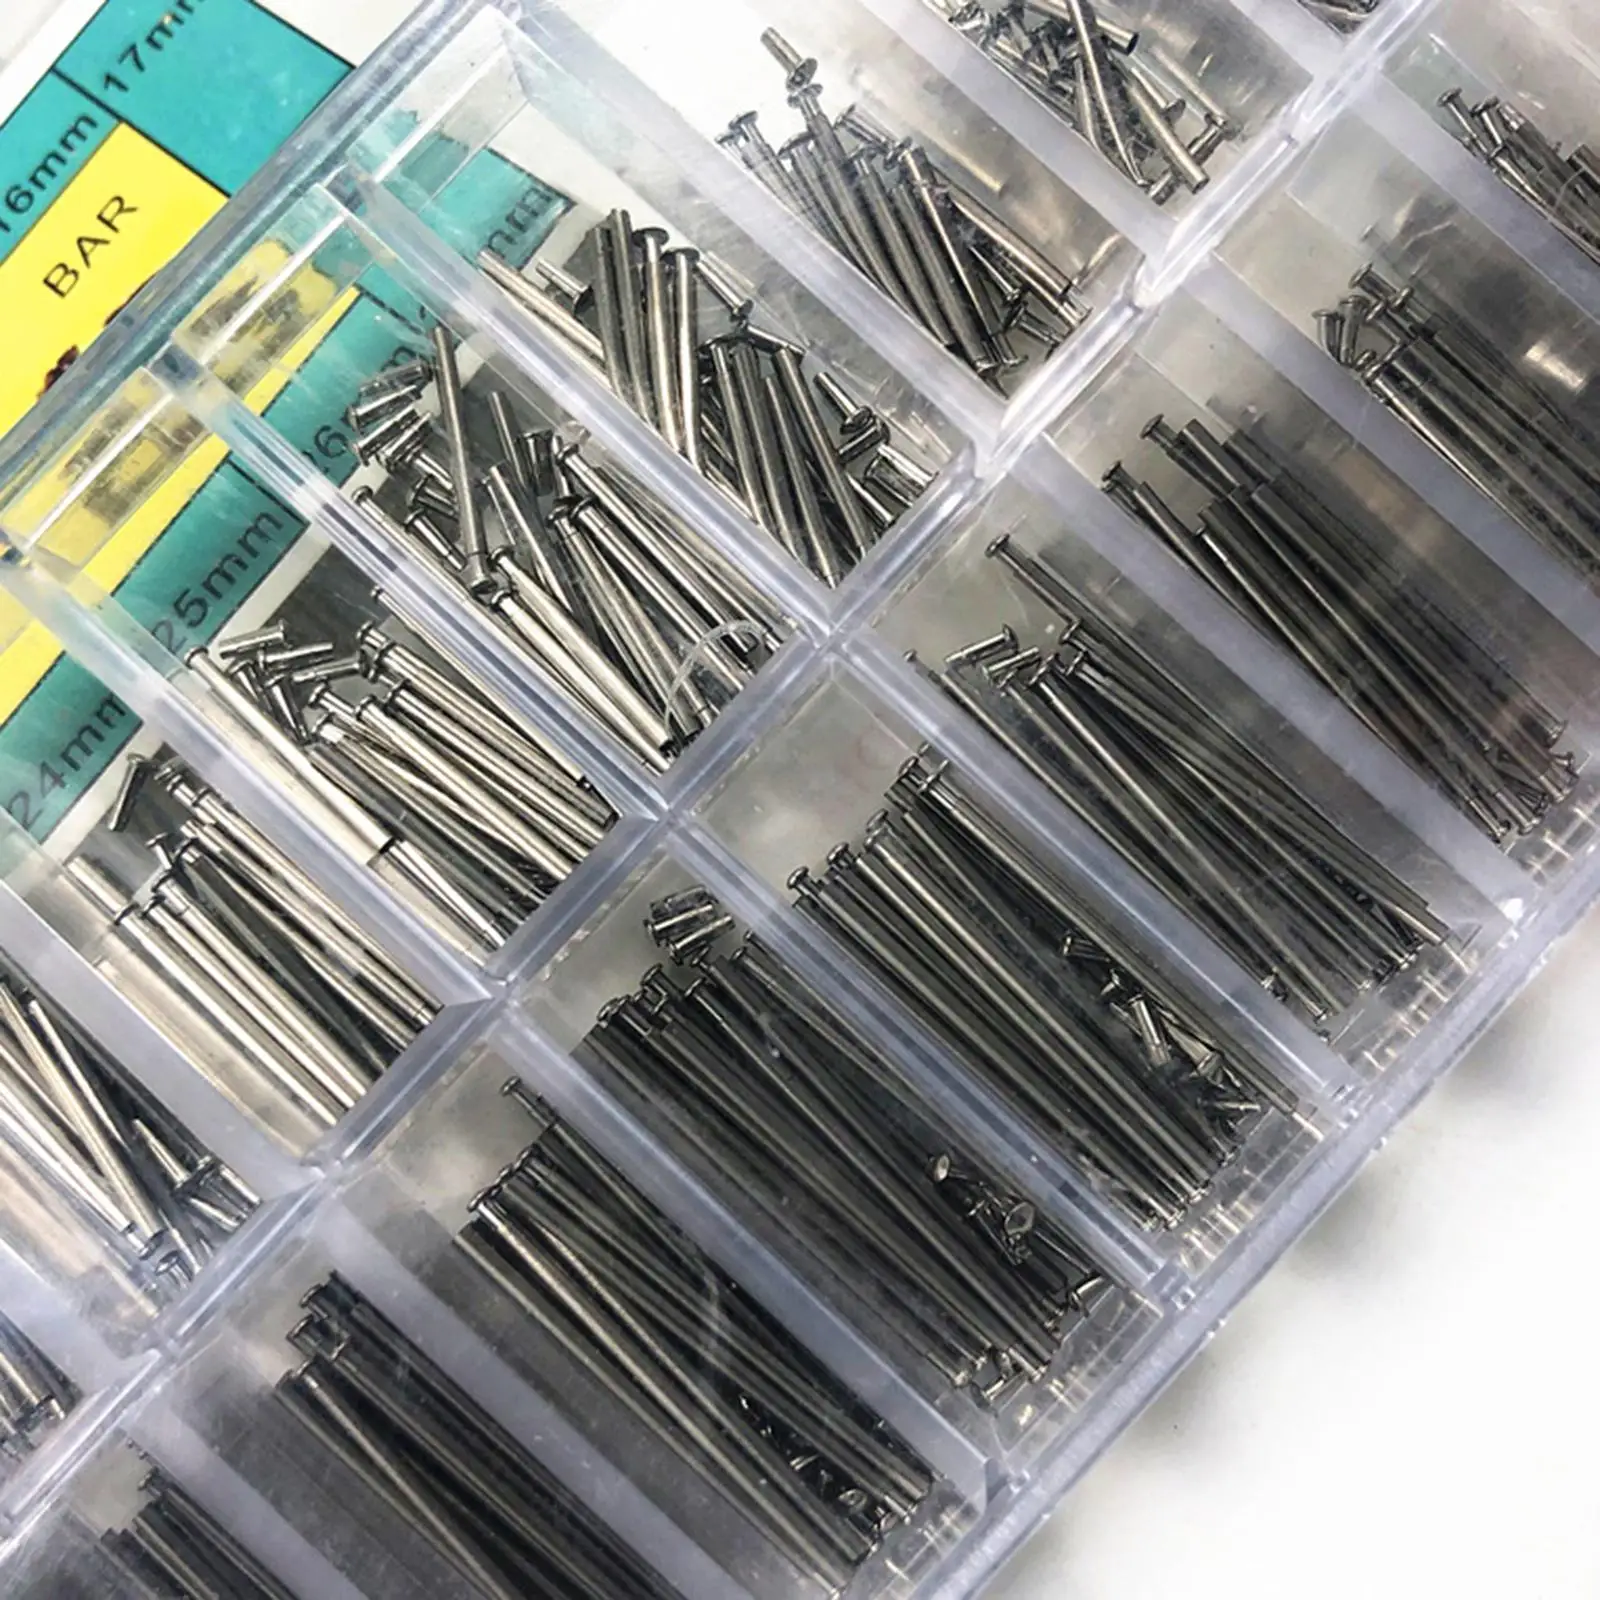 300x  Spring Bars 8-27mm Watchmaker Assortment Strap  Pins for Repair or Replacment